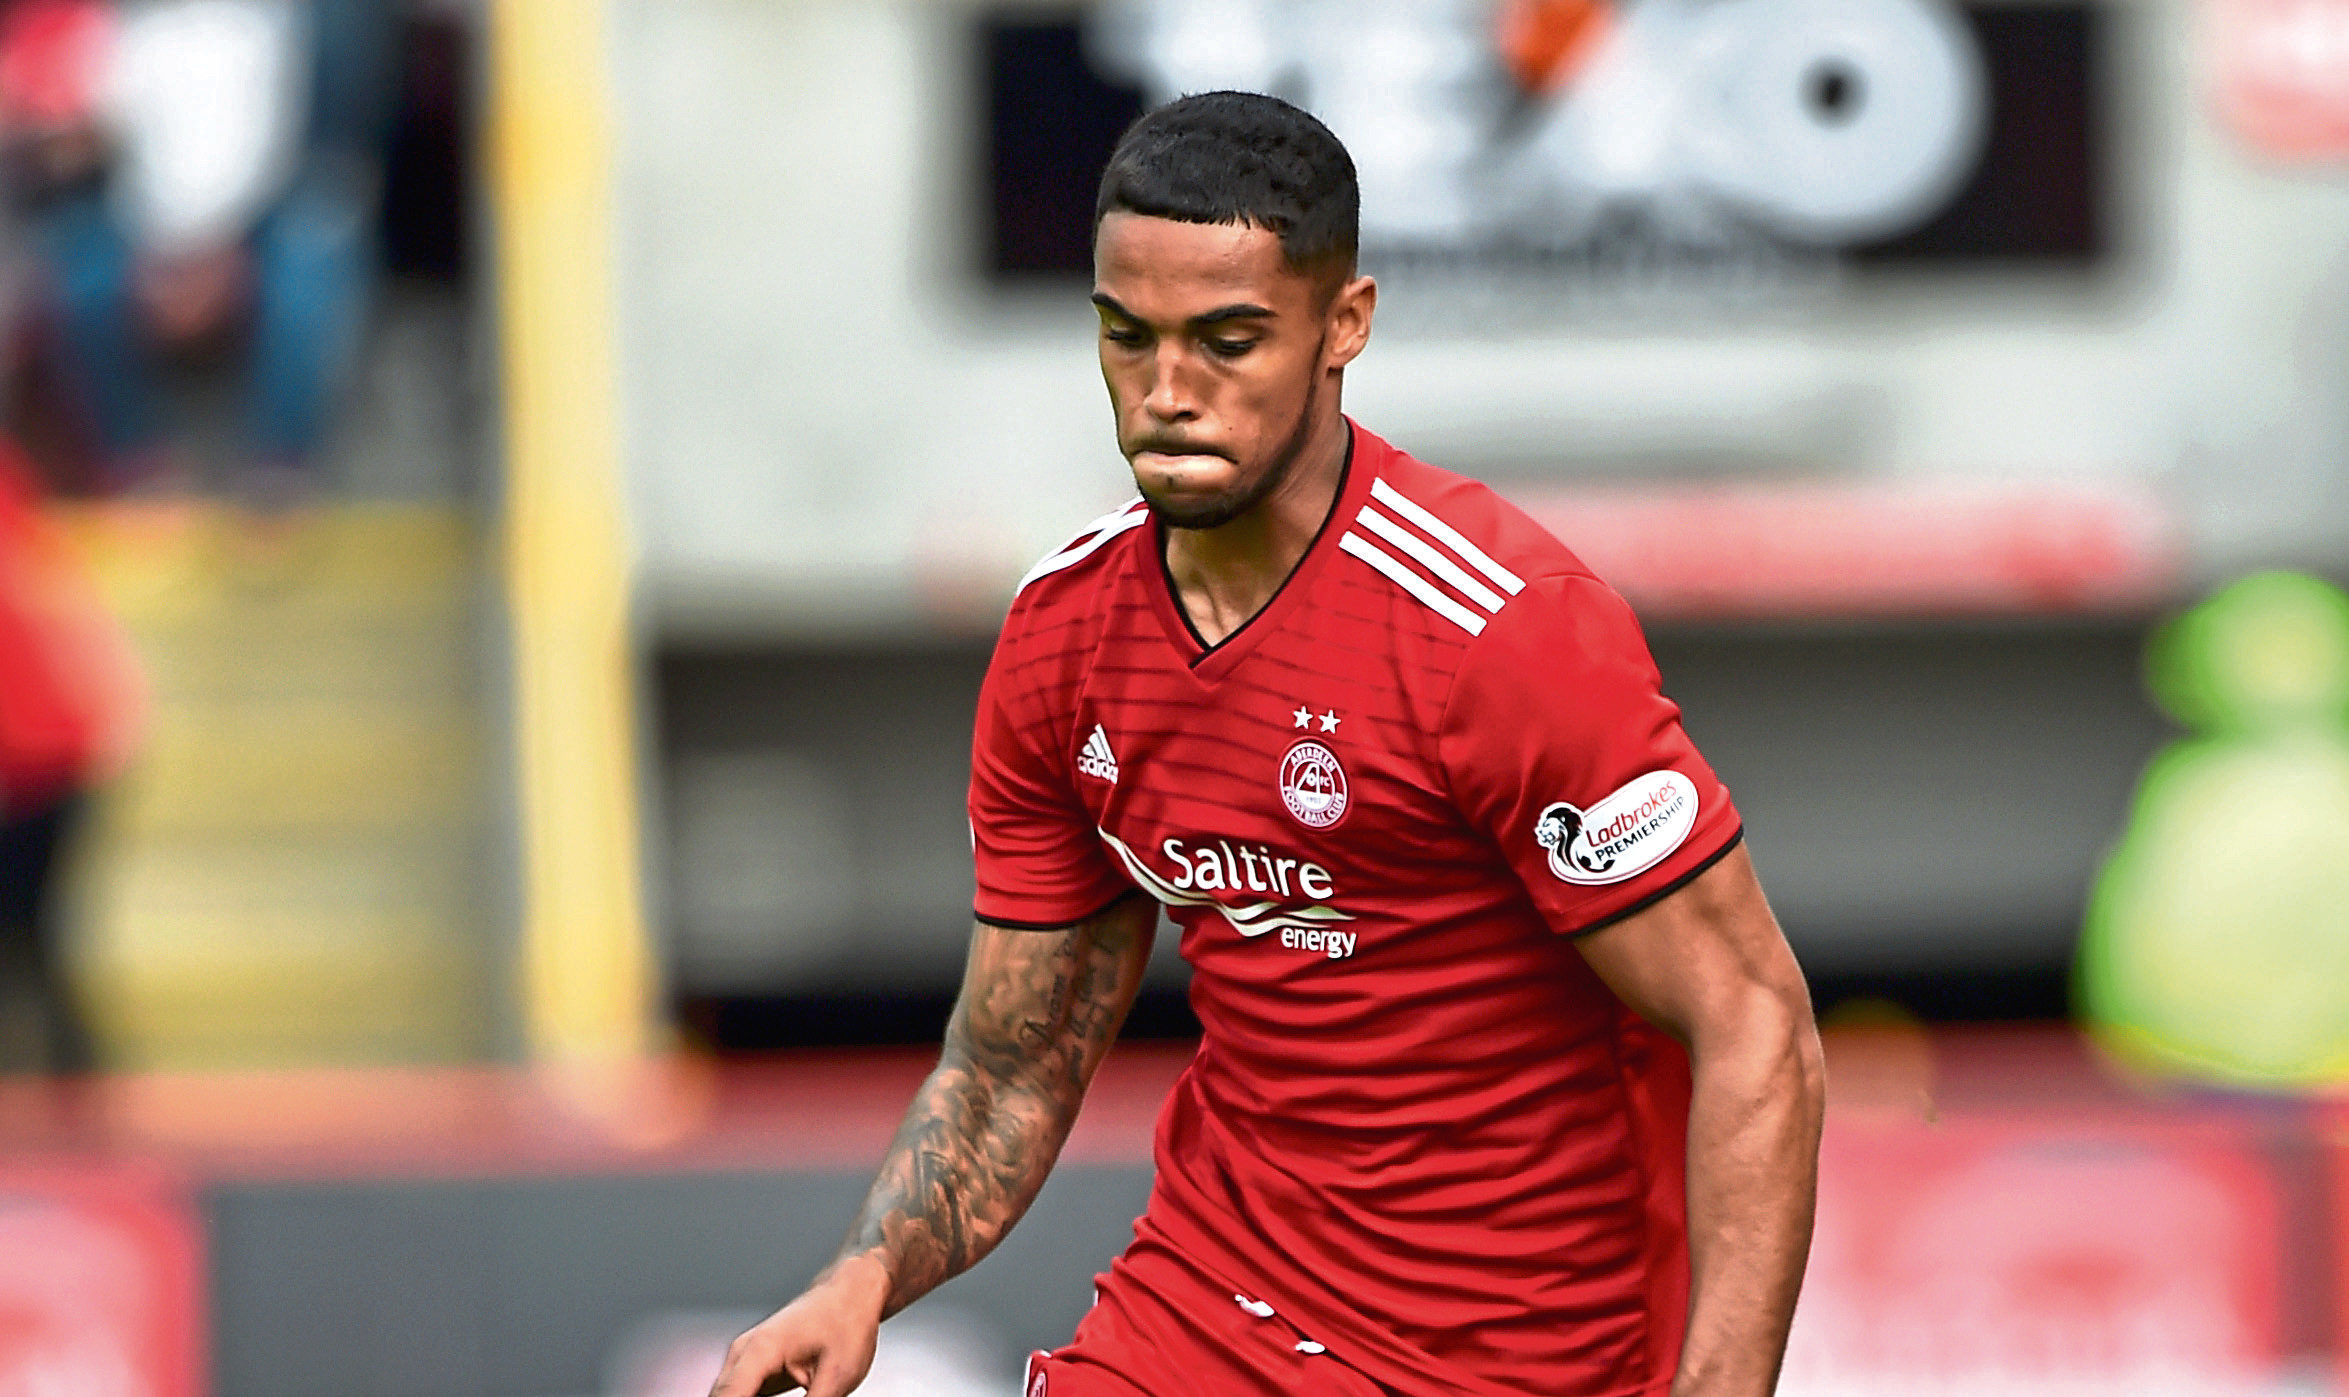 Max Lowe has made 42 appearances for the Dons this season.